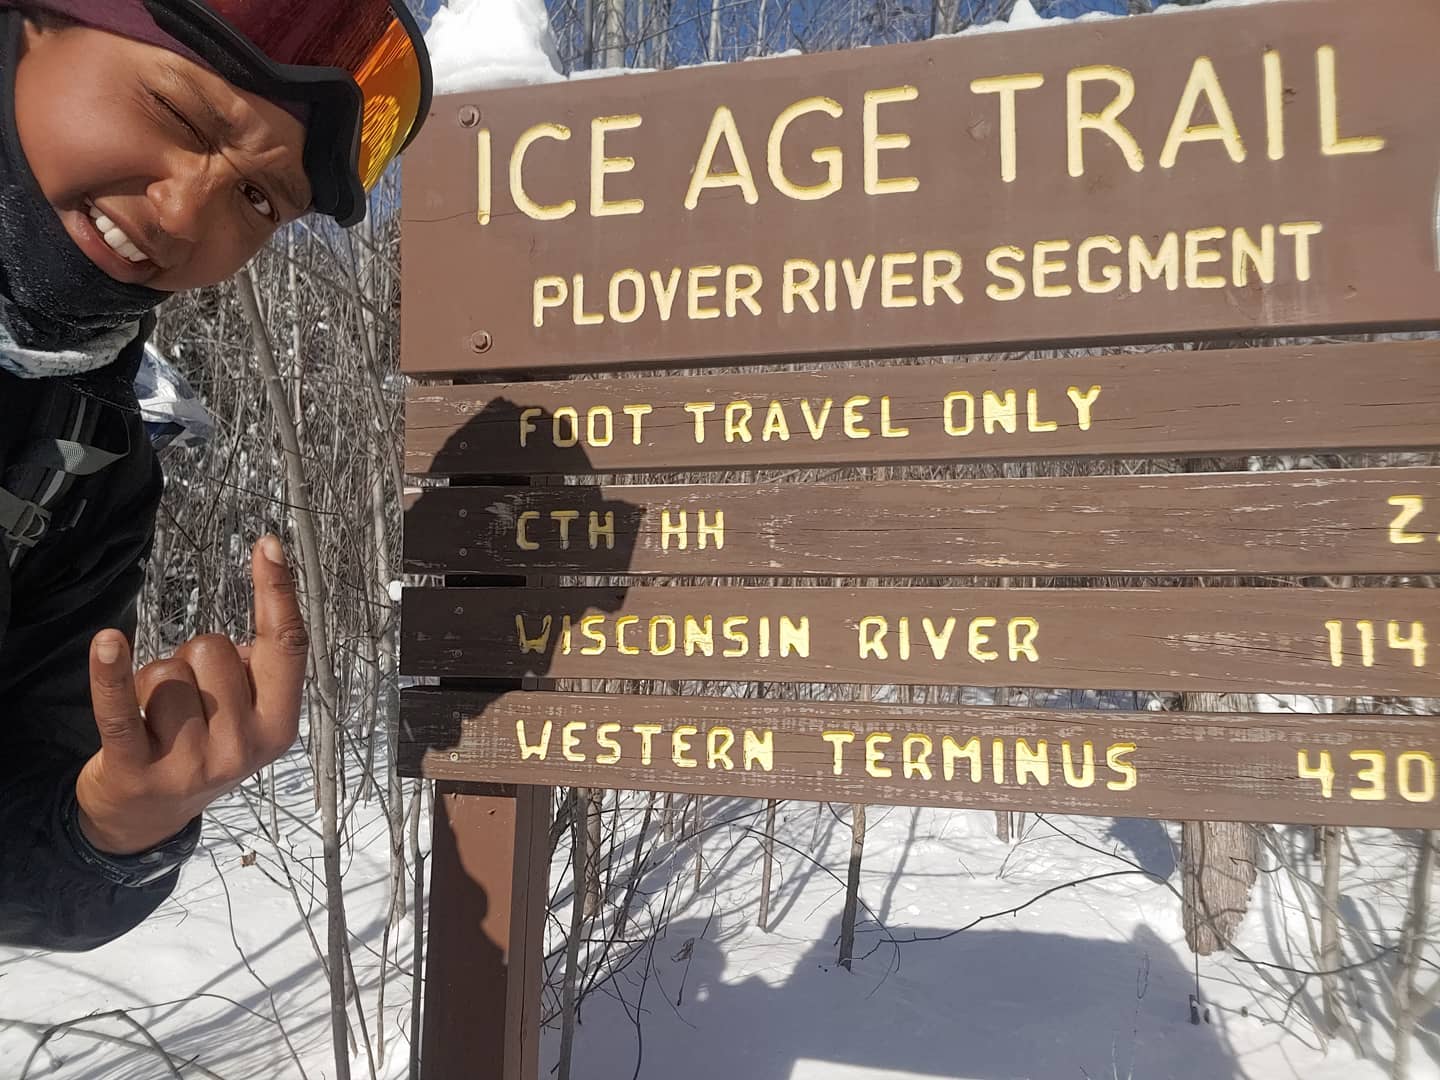 With A Passion For The Outdoors, Emily Ford Aims To Complete Winter Thru-Hike Of Ice Age Trail